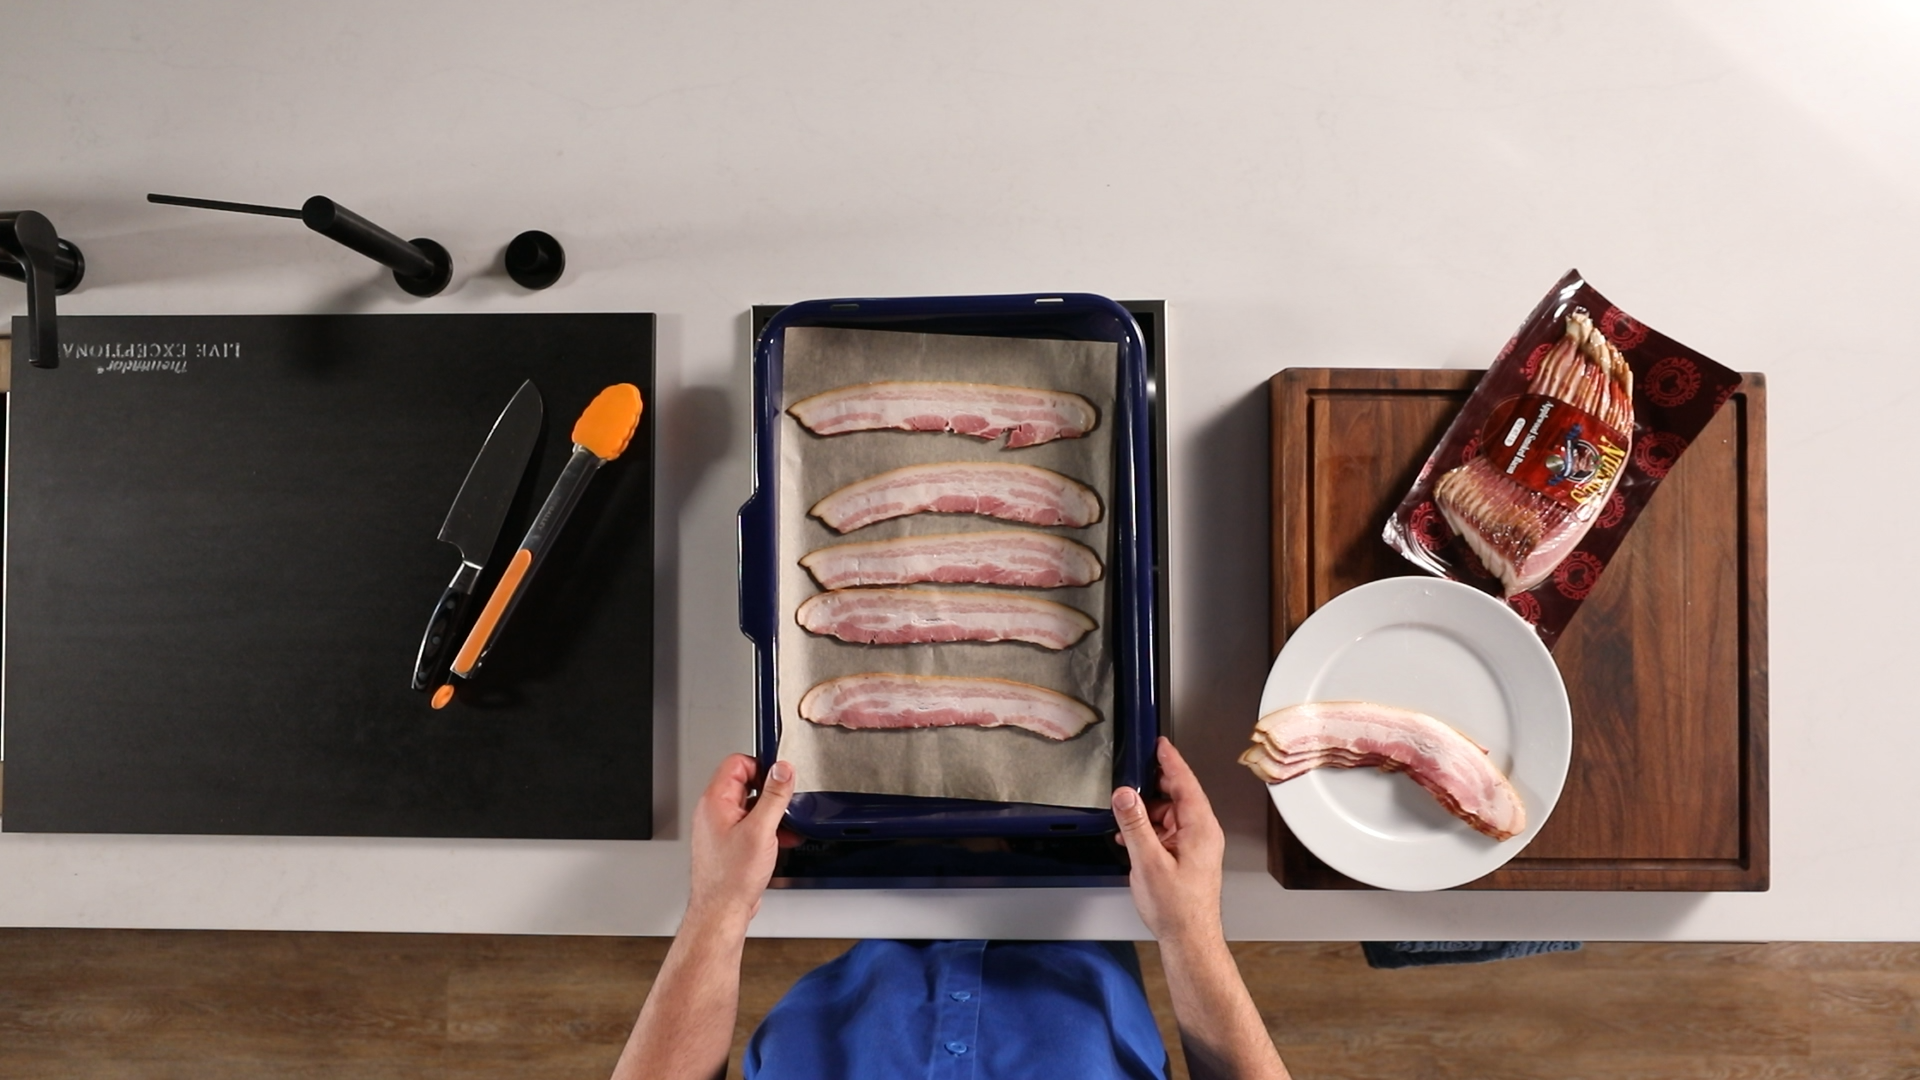 How To Bake Bacon, Raised On A Wire Rack, Don's Appliances